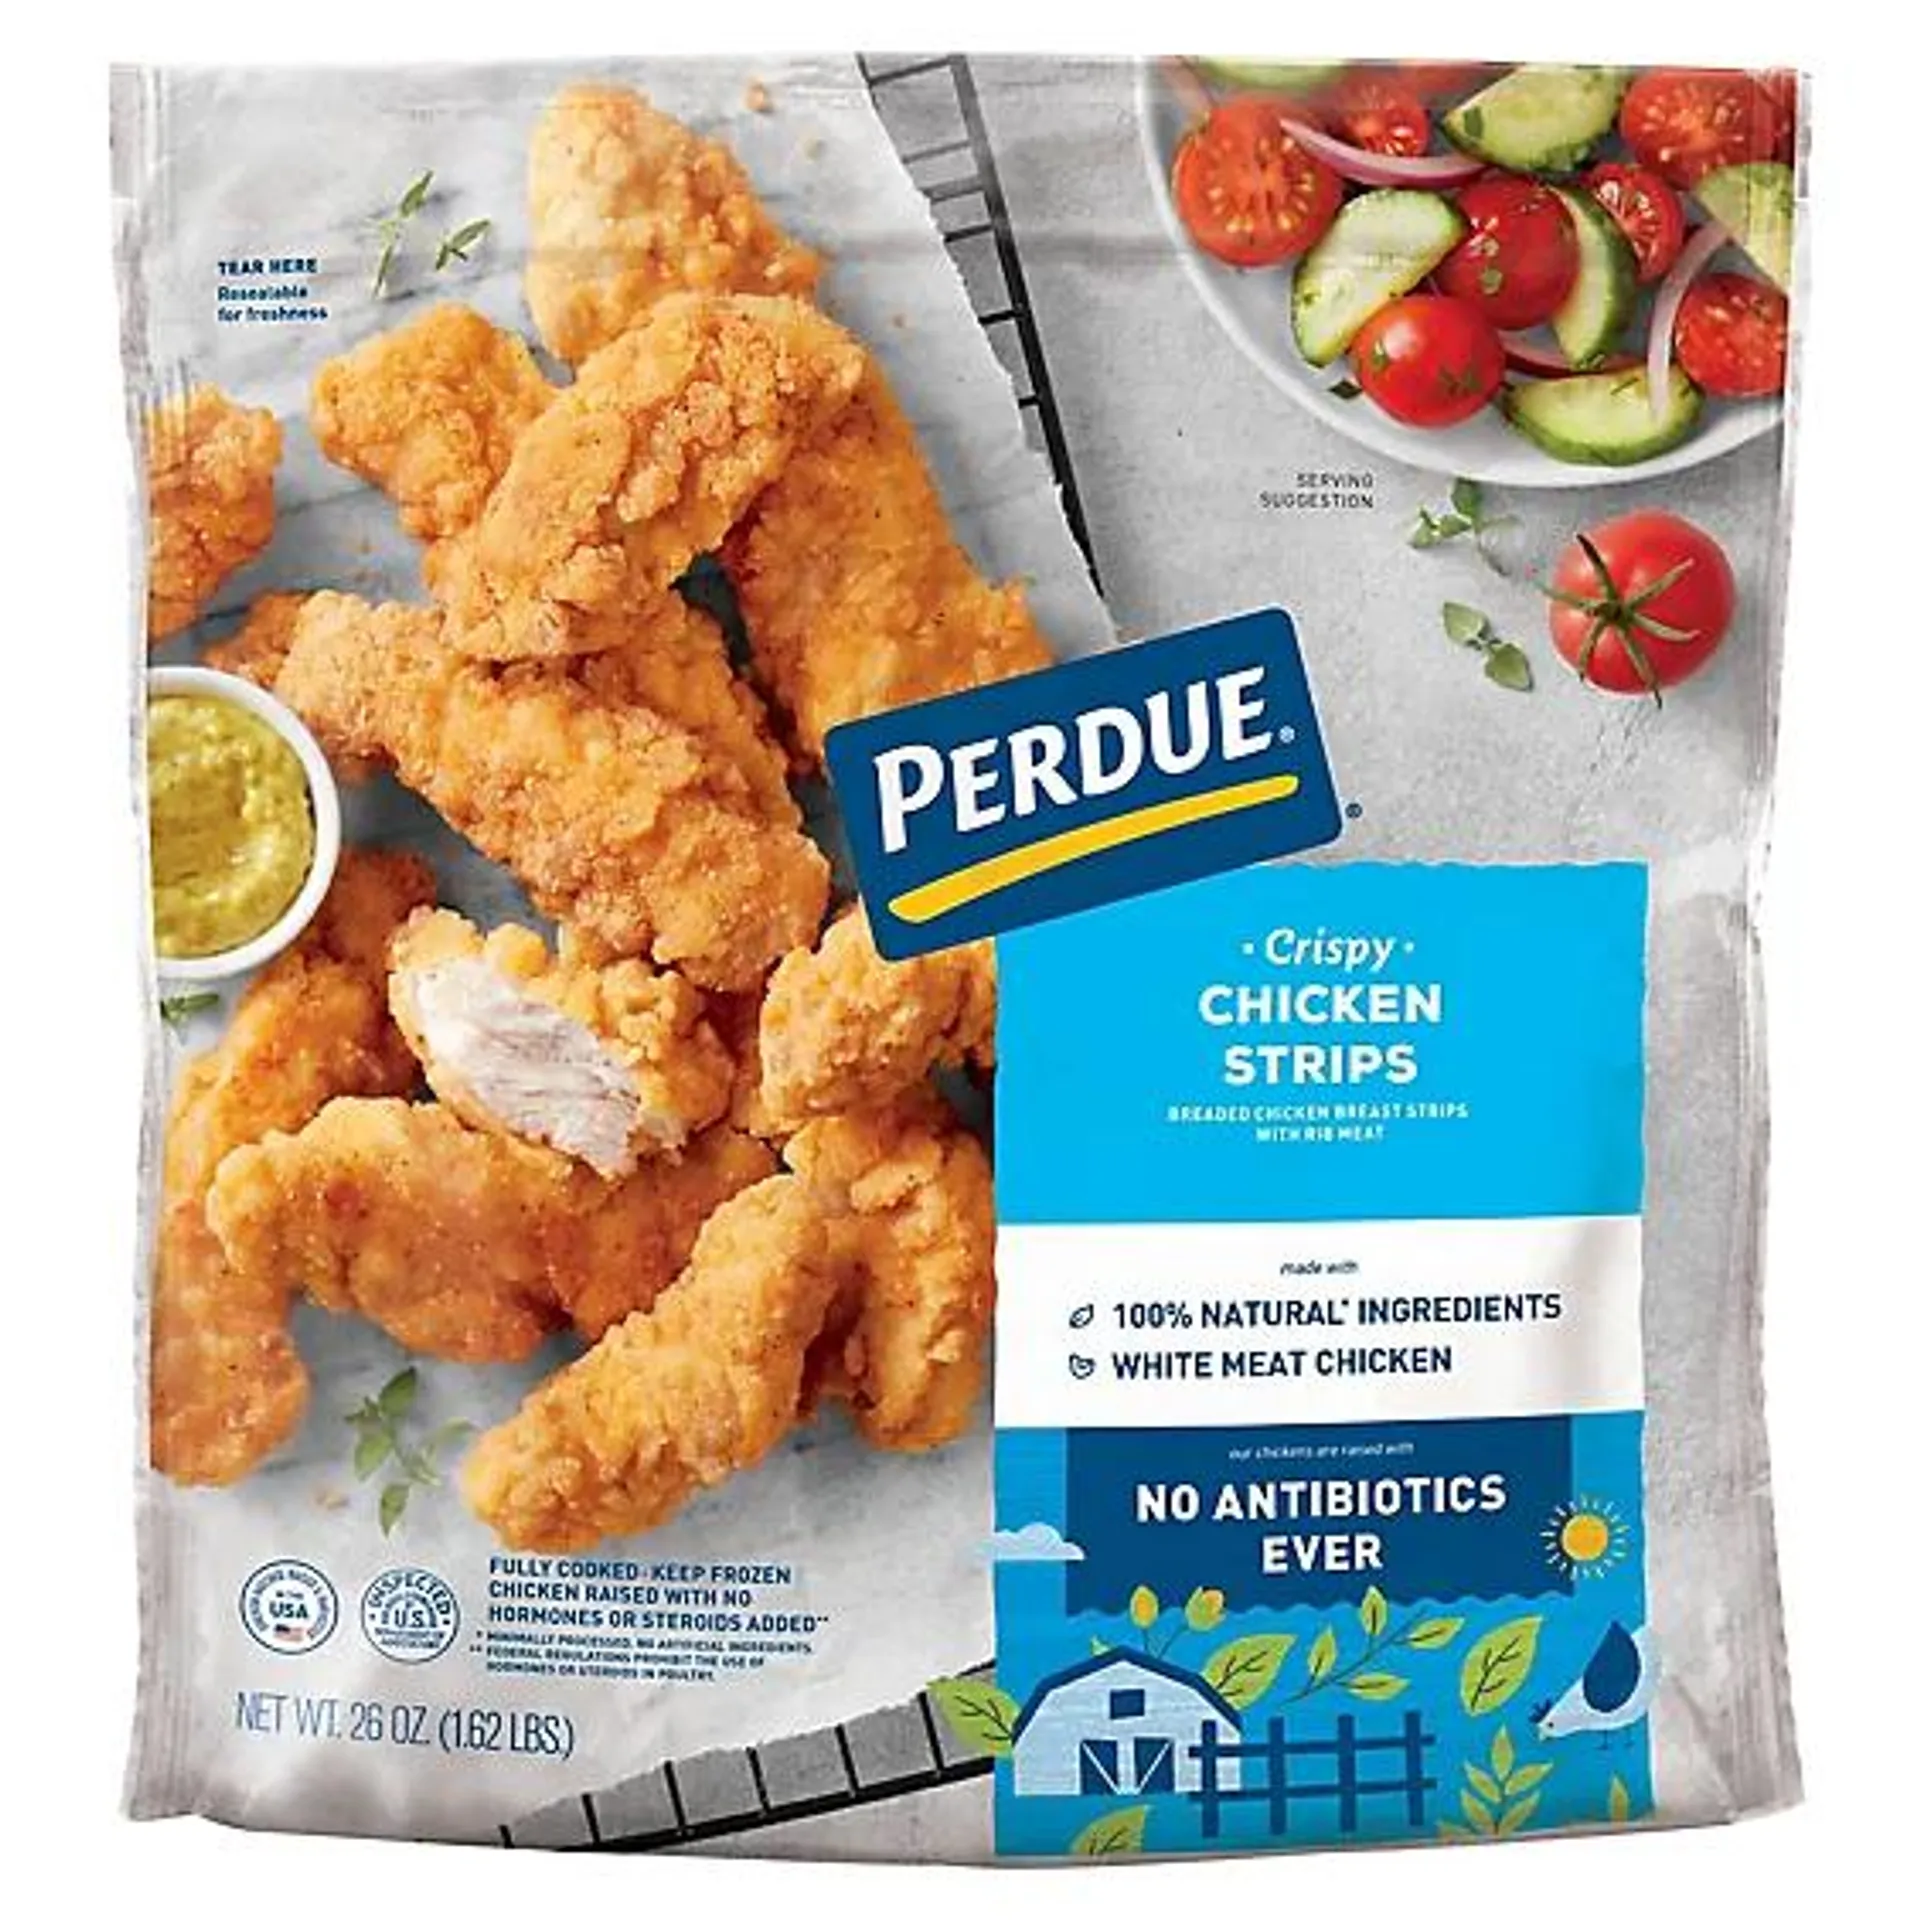 PERDUE Crispy Chicken Strips Fully Cooked Frozen Meal - 26 Oz